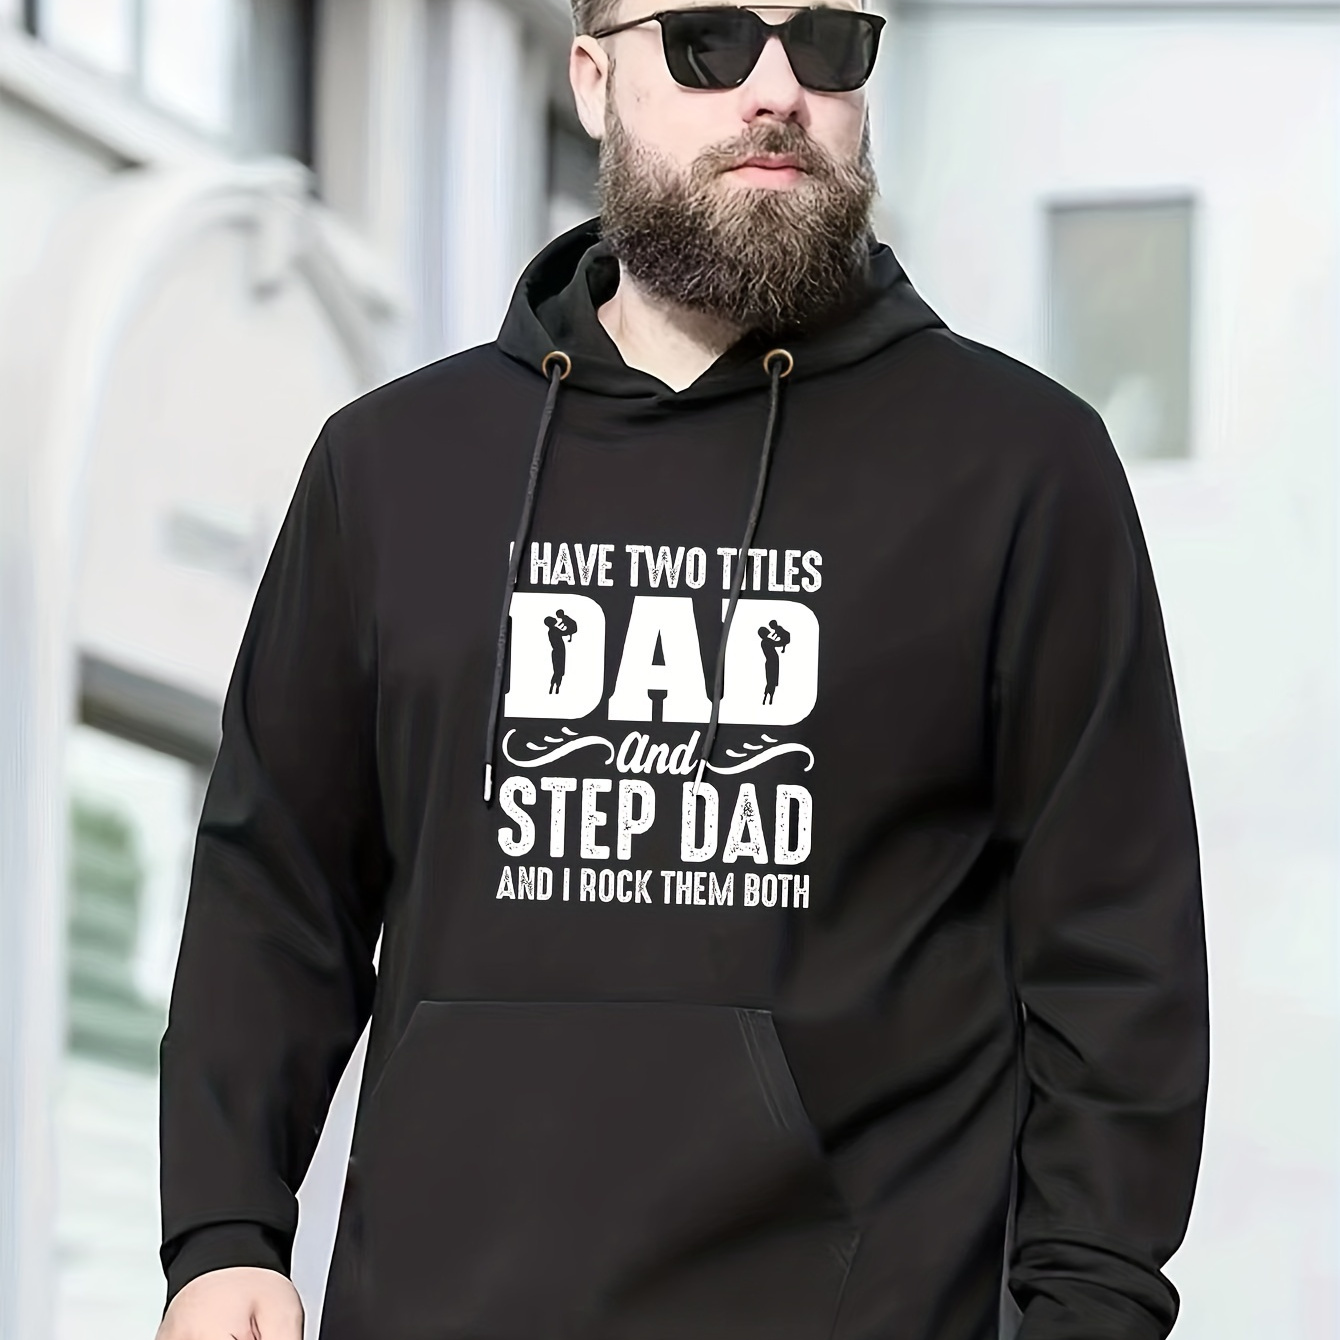 

Plus Size Men's "dad And Step Dad" Print Hooded Sweatshirt Oversized Hoodies Fashion Casual Tops For Spring/autumn, Men's Clothing